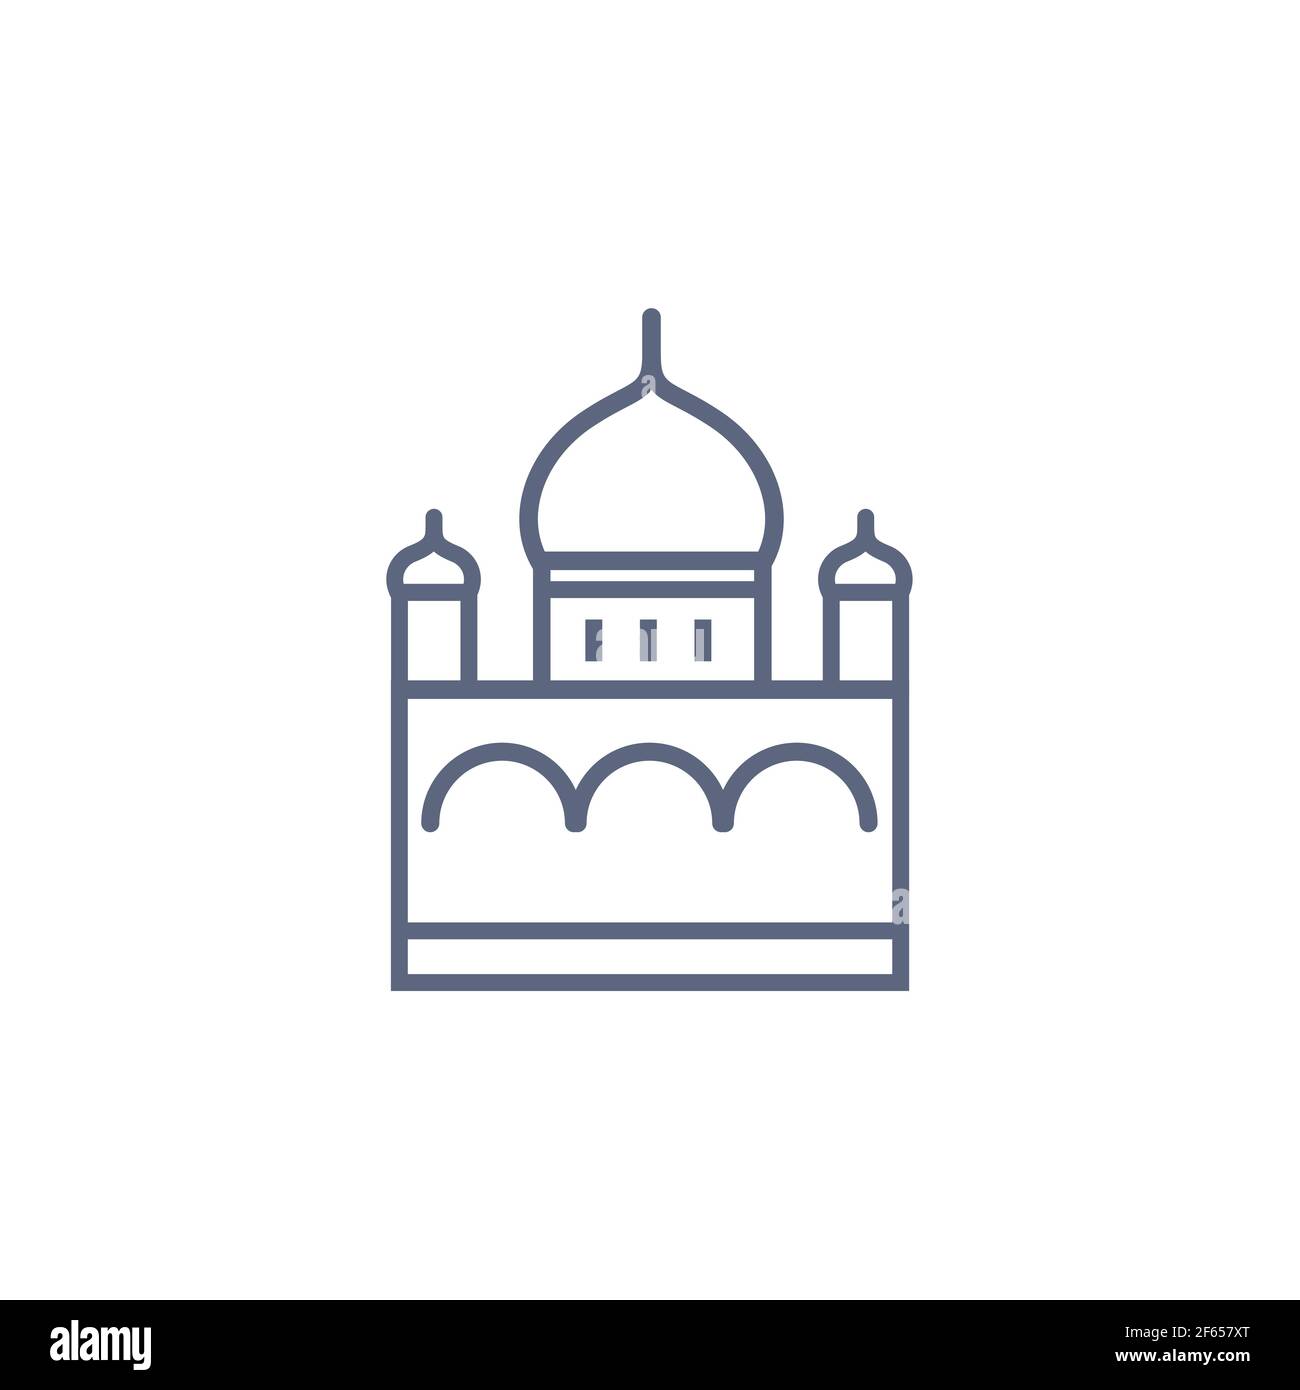 Church line icon - orthodox chapel simple linear pictogram on white background. Vector illustration Stock Vector